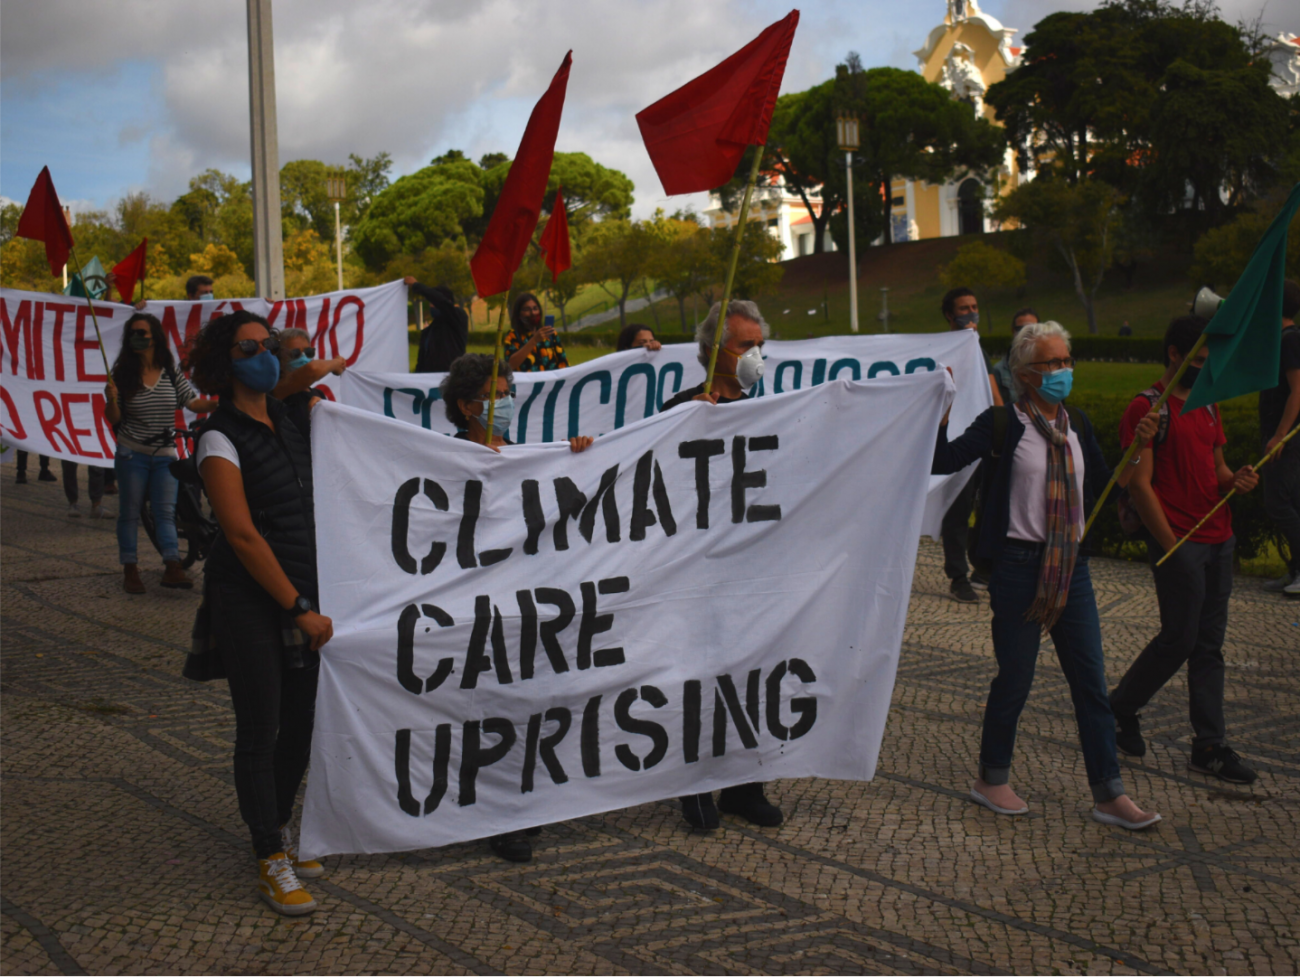 Activists with the group Climáximo gathered in Lisbon, Portugal on Oct. 5 as part of the Climate Care Uprising — a wave of actions across Europe organized by the By 2020 We Rise Up platform. (WNV/Pedro Alvim)